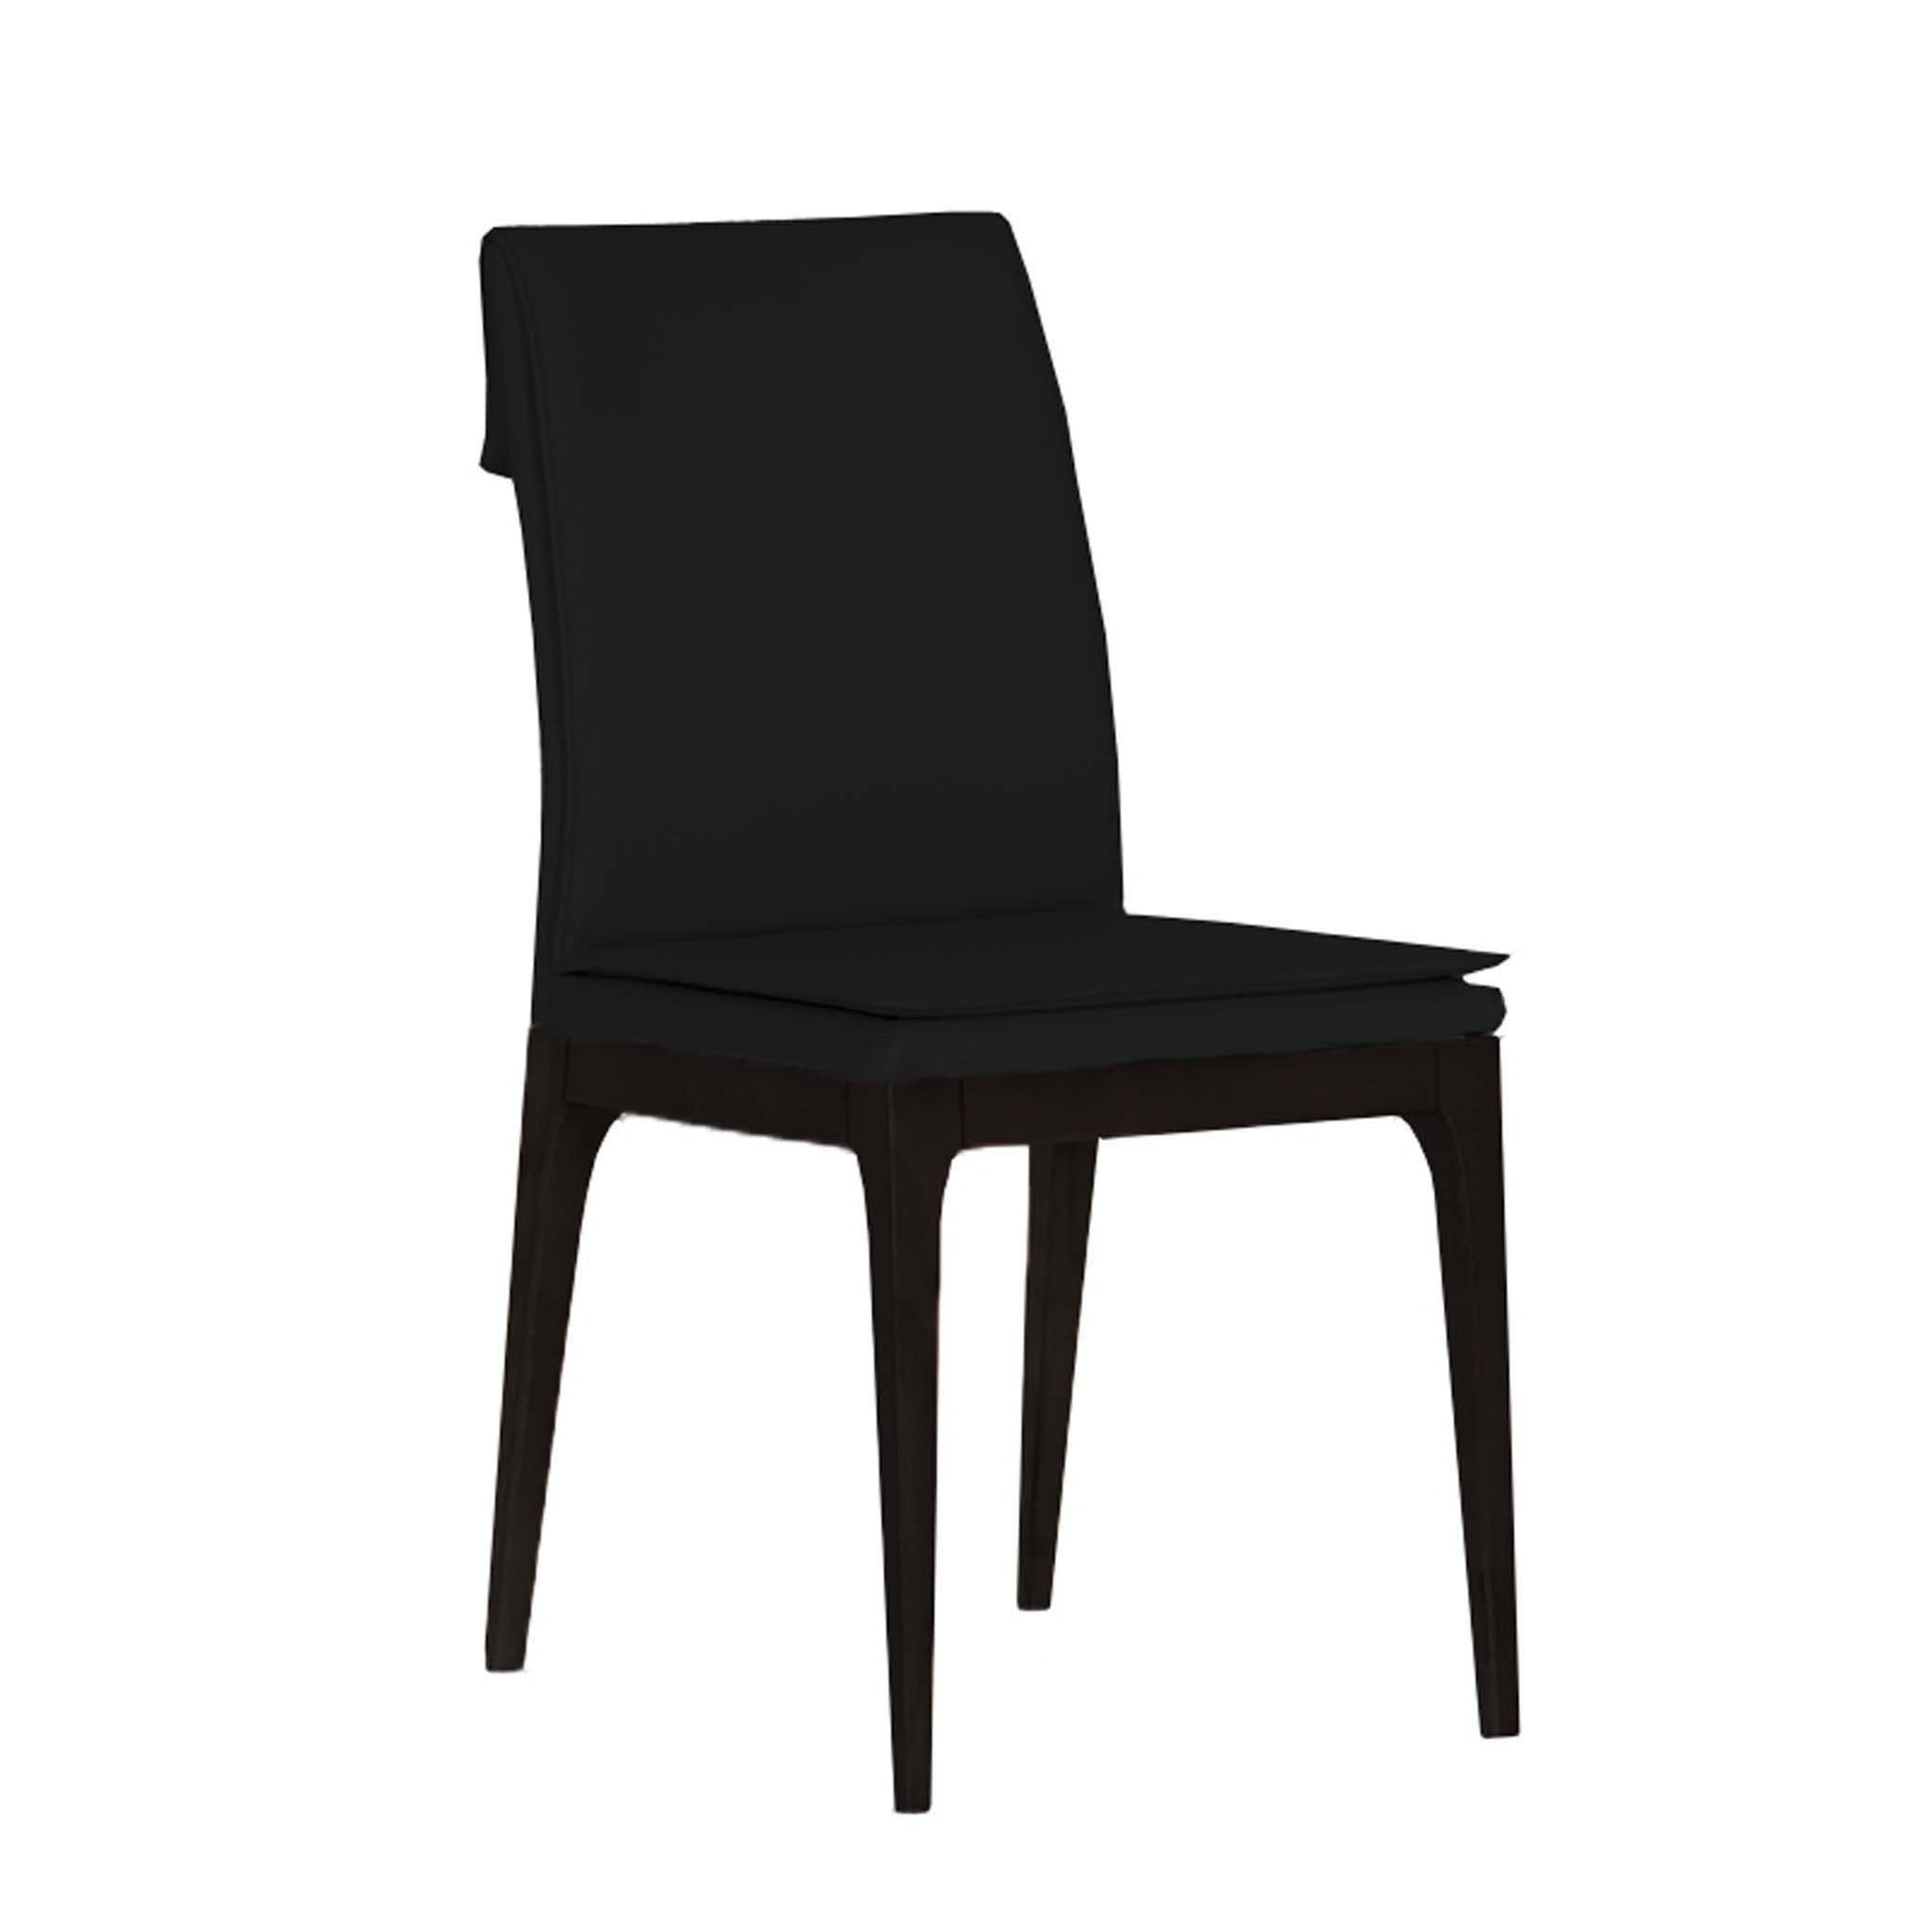 Bellini-Rosetta Dining Chair-Dining Chairs-MODTEMPO